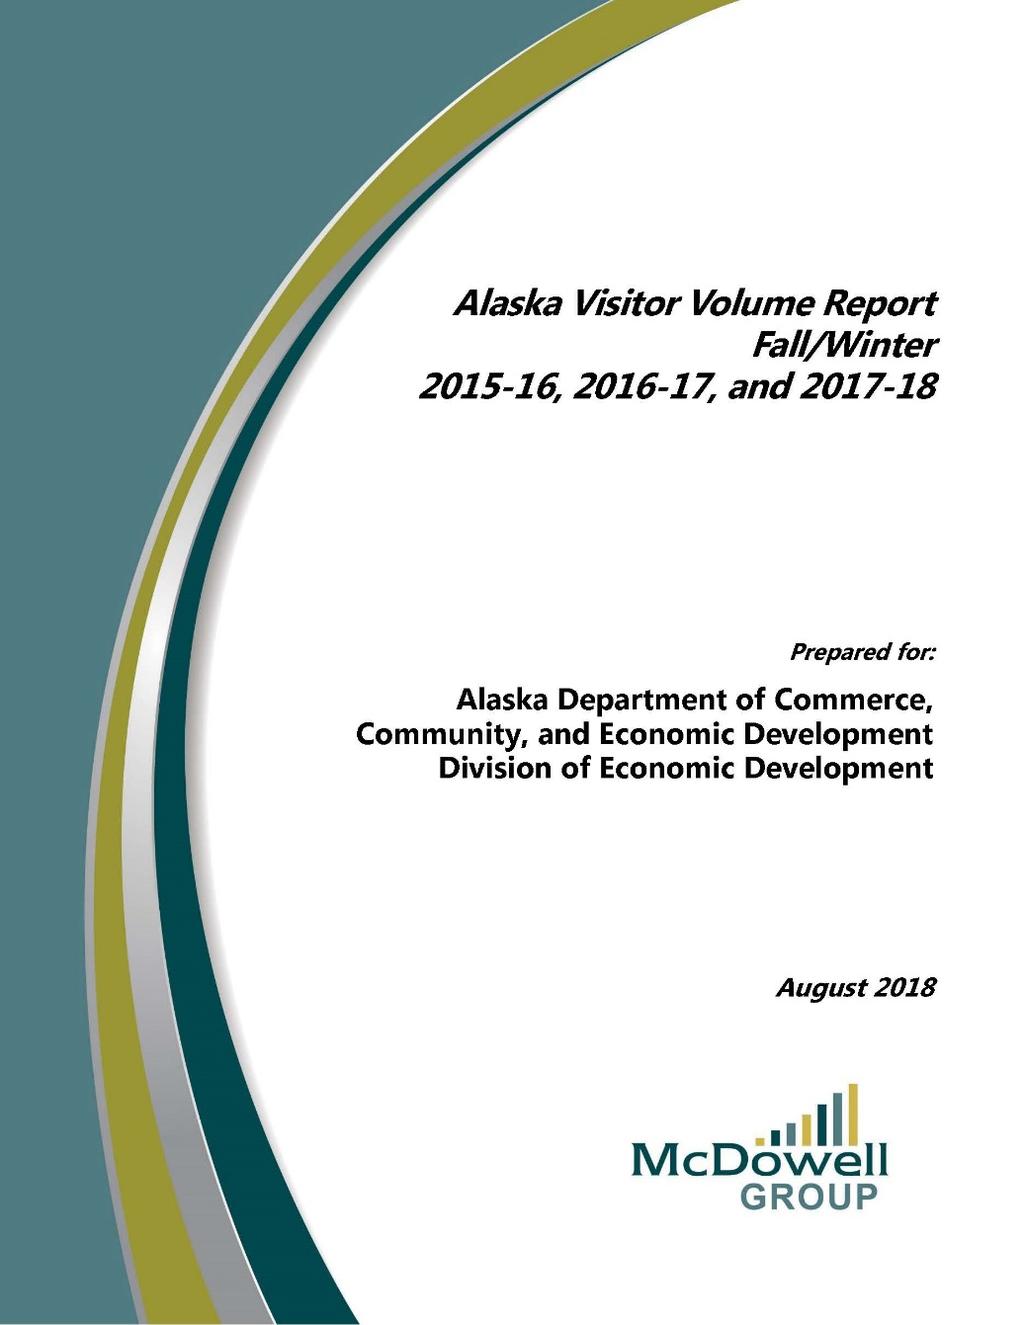 NEW Visitor Volume Reports Updates occur in between AVSP study periods; managed by State of Alaska, DCCED Summer 2017 Fall/Winter 2015/16 to 2017/18 Reports include indicators Outbound air